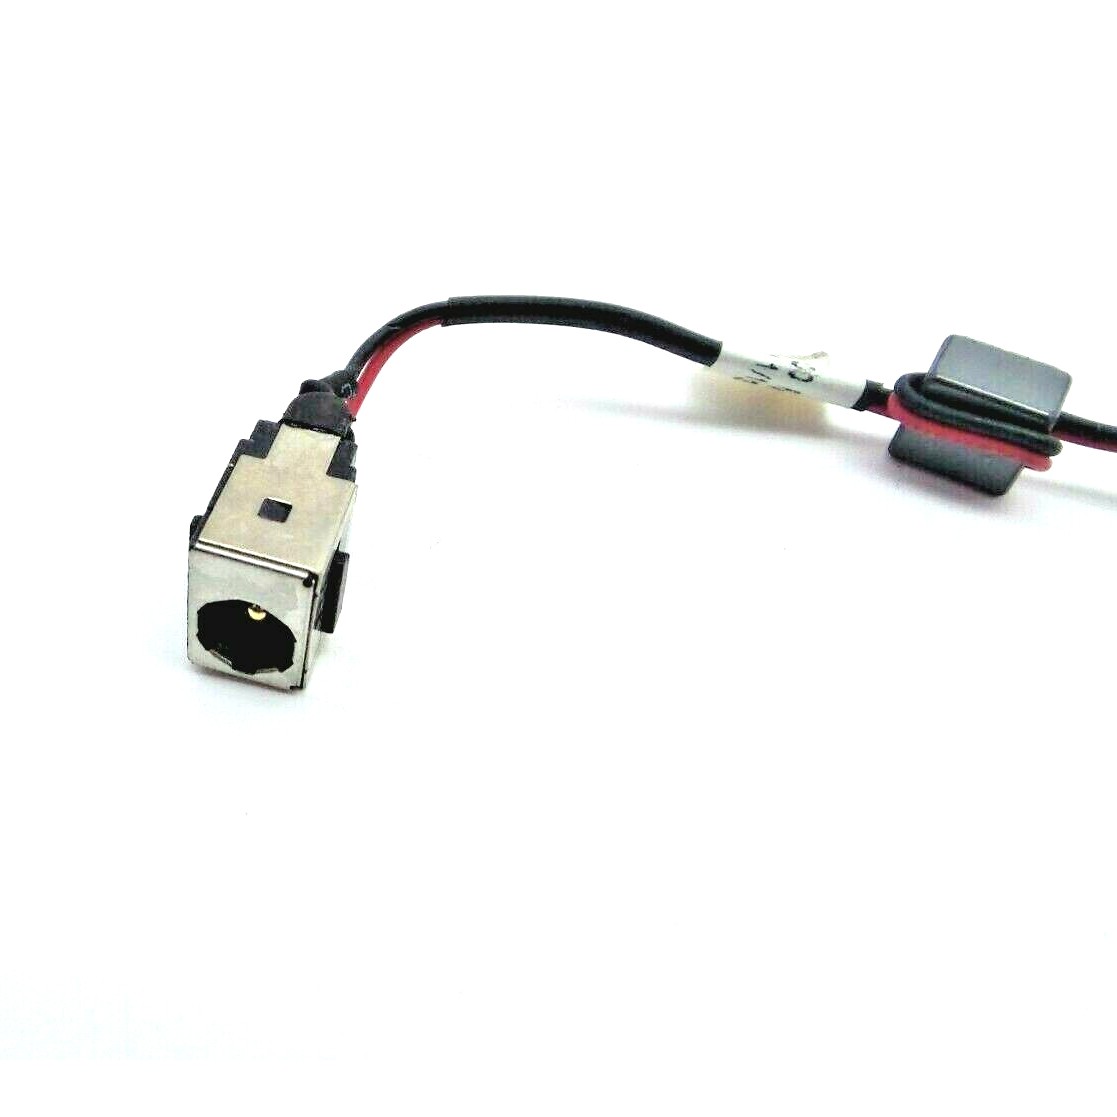 Conector Power Jack for Toshiba Satellite Nb200 dc301007d00